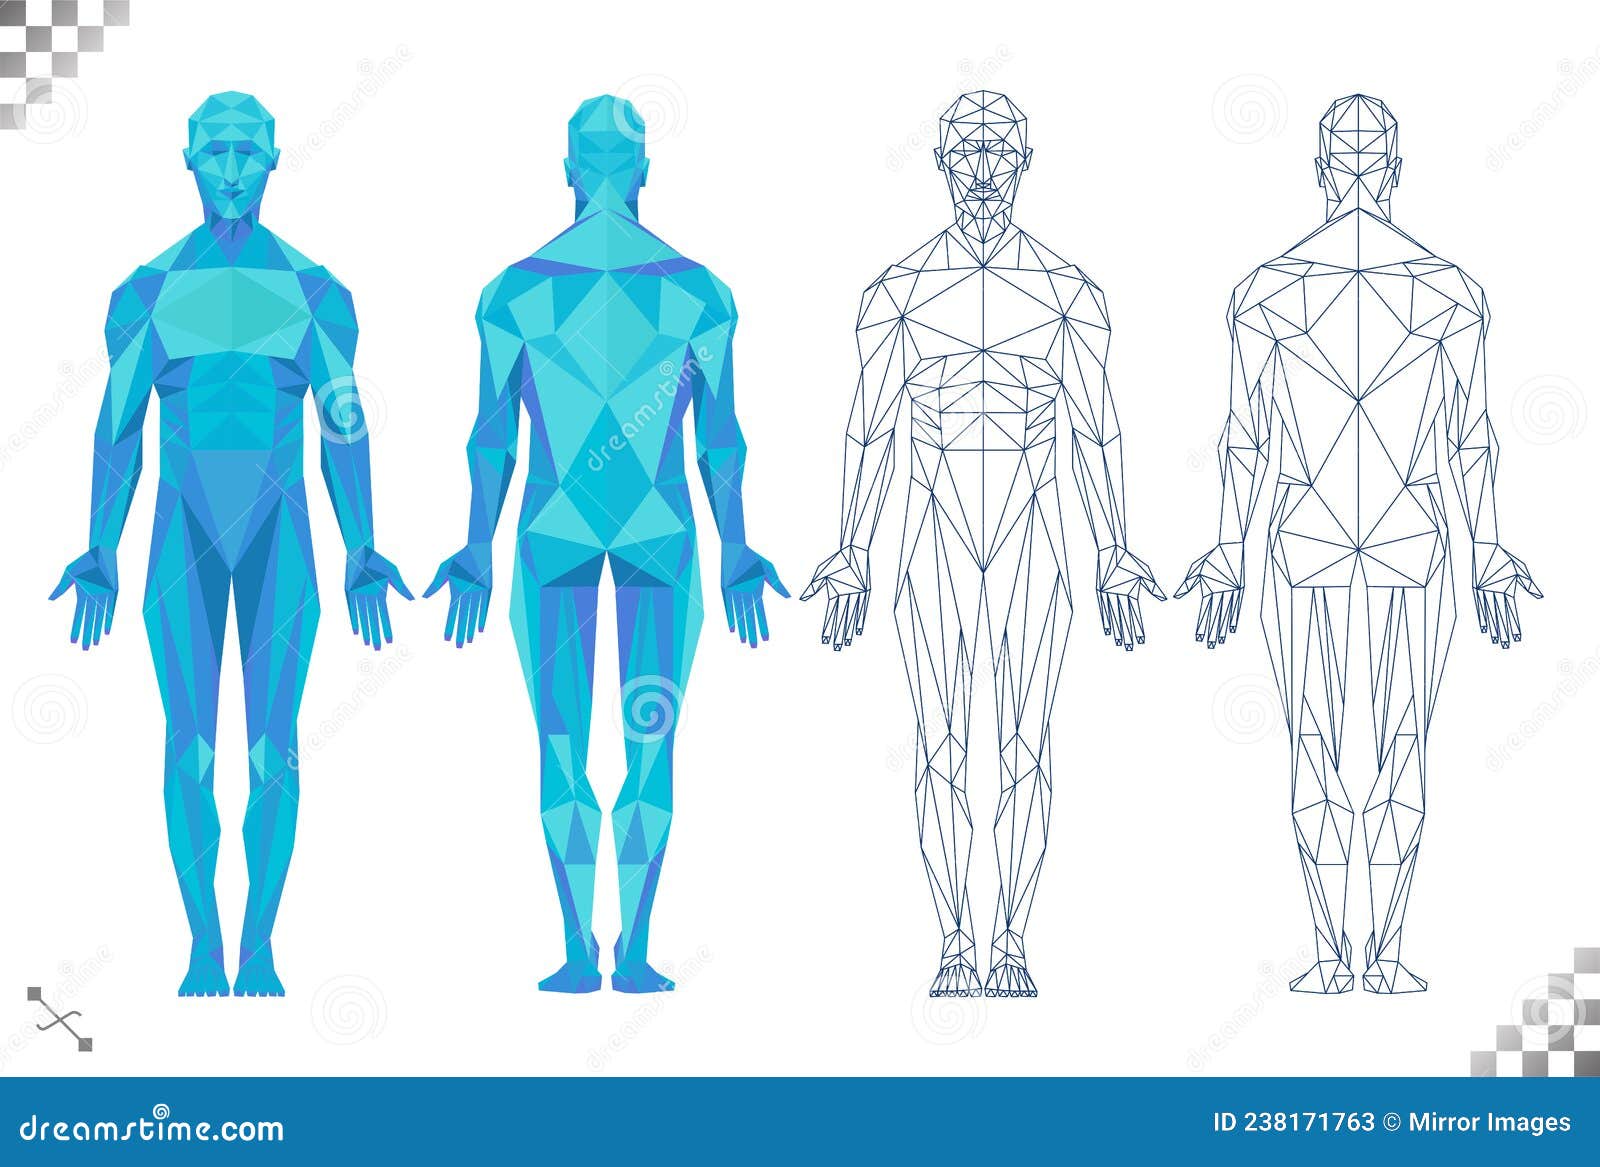 Low Poly Human Body Black Line Triangles Line and Blue Geometric